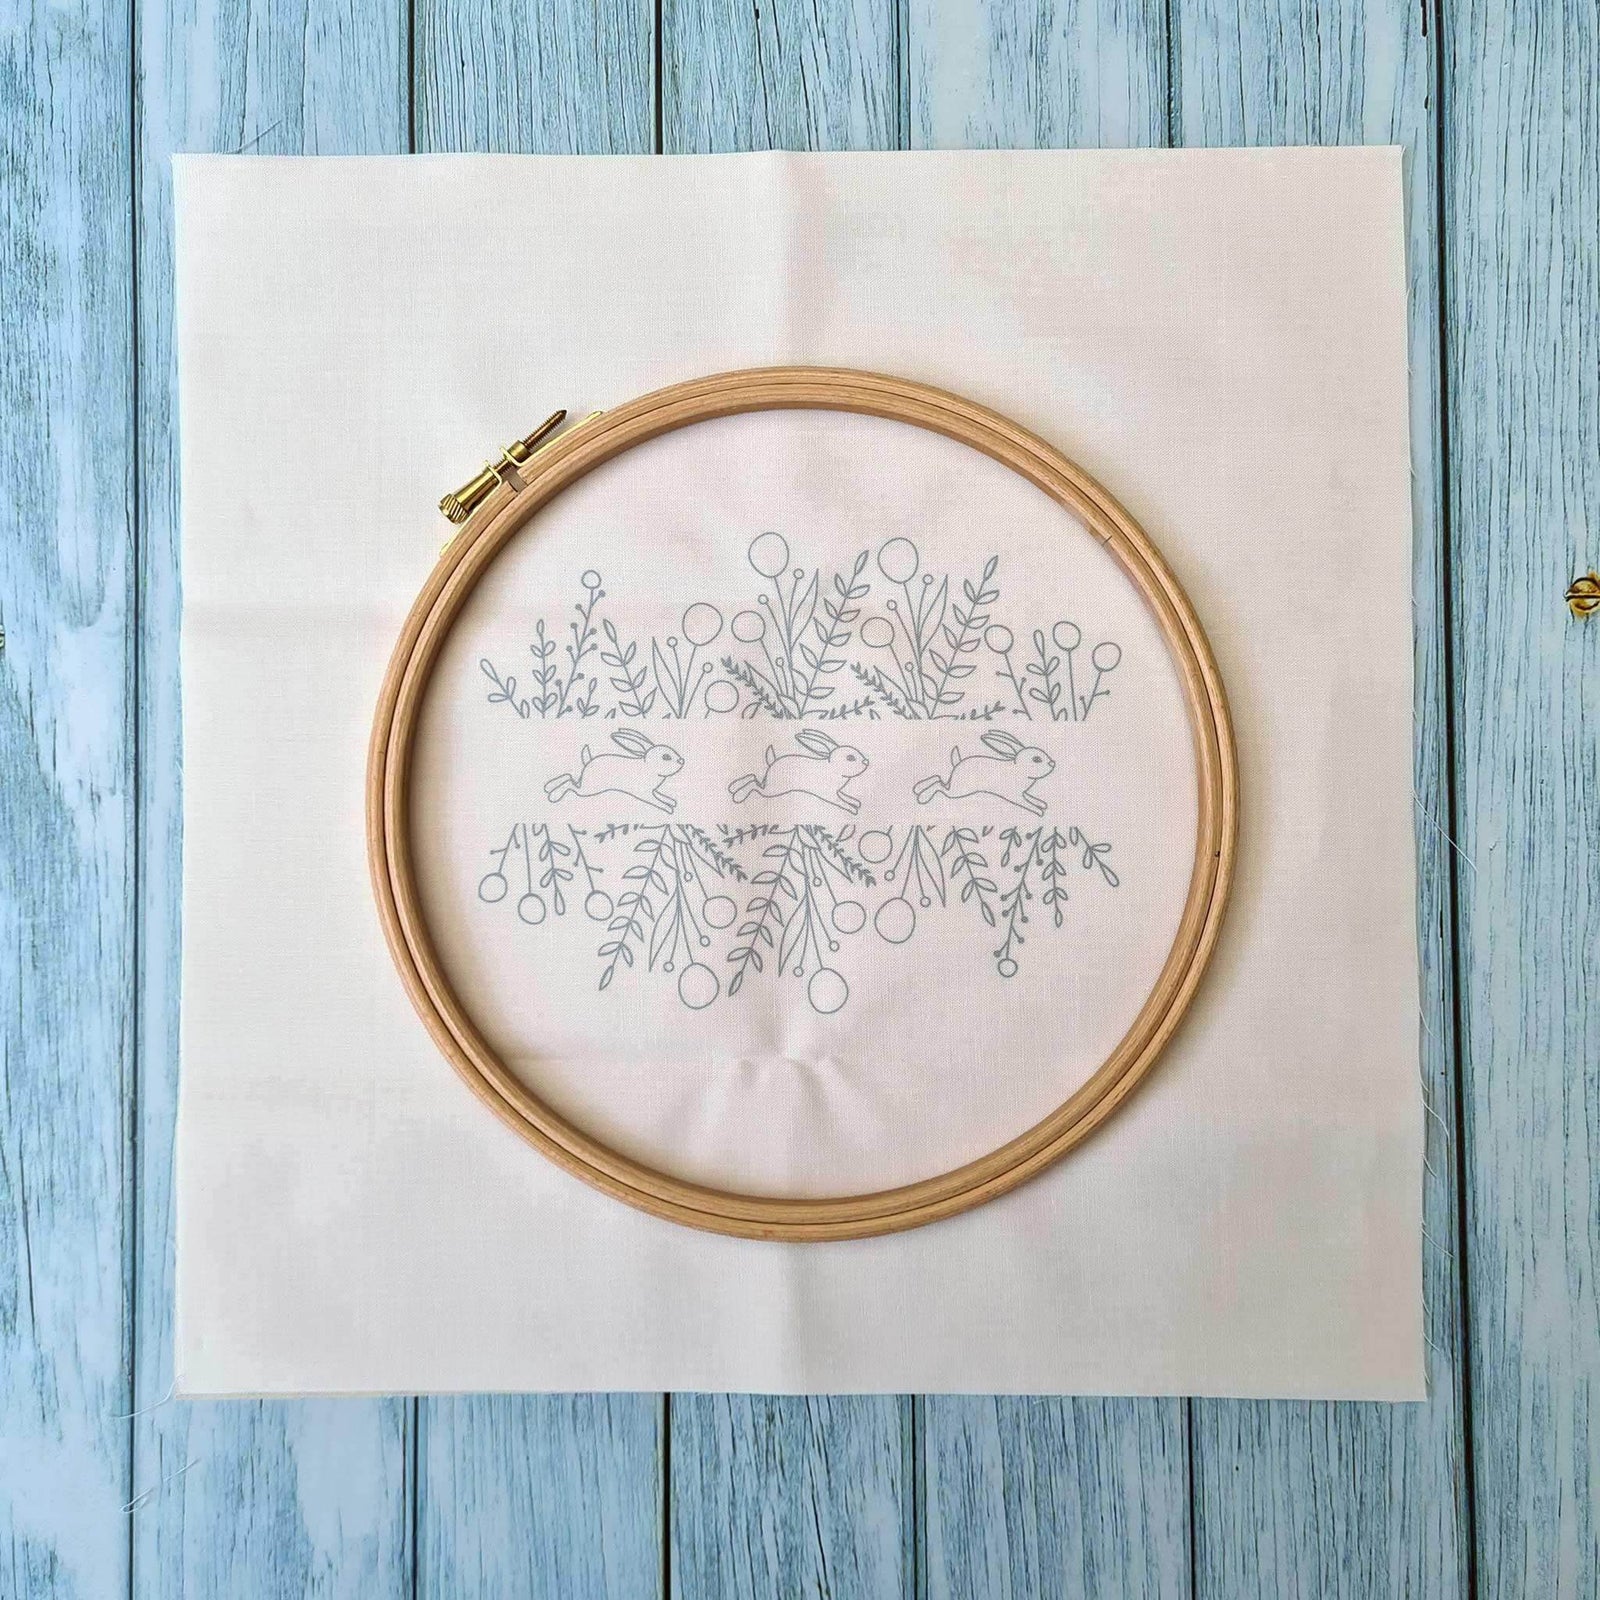 Hand Embroidery Patterns - StitchDoodles